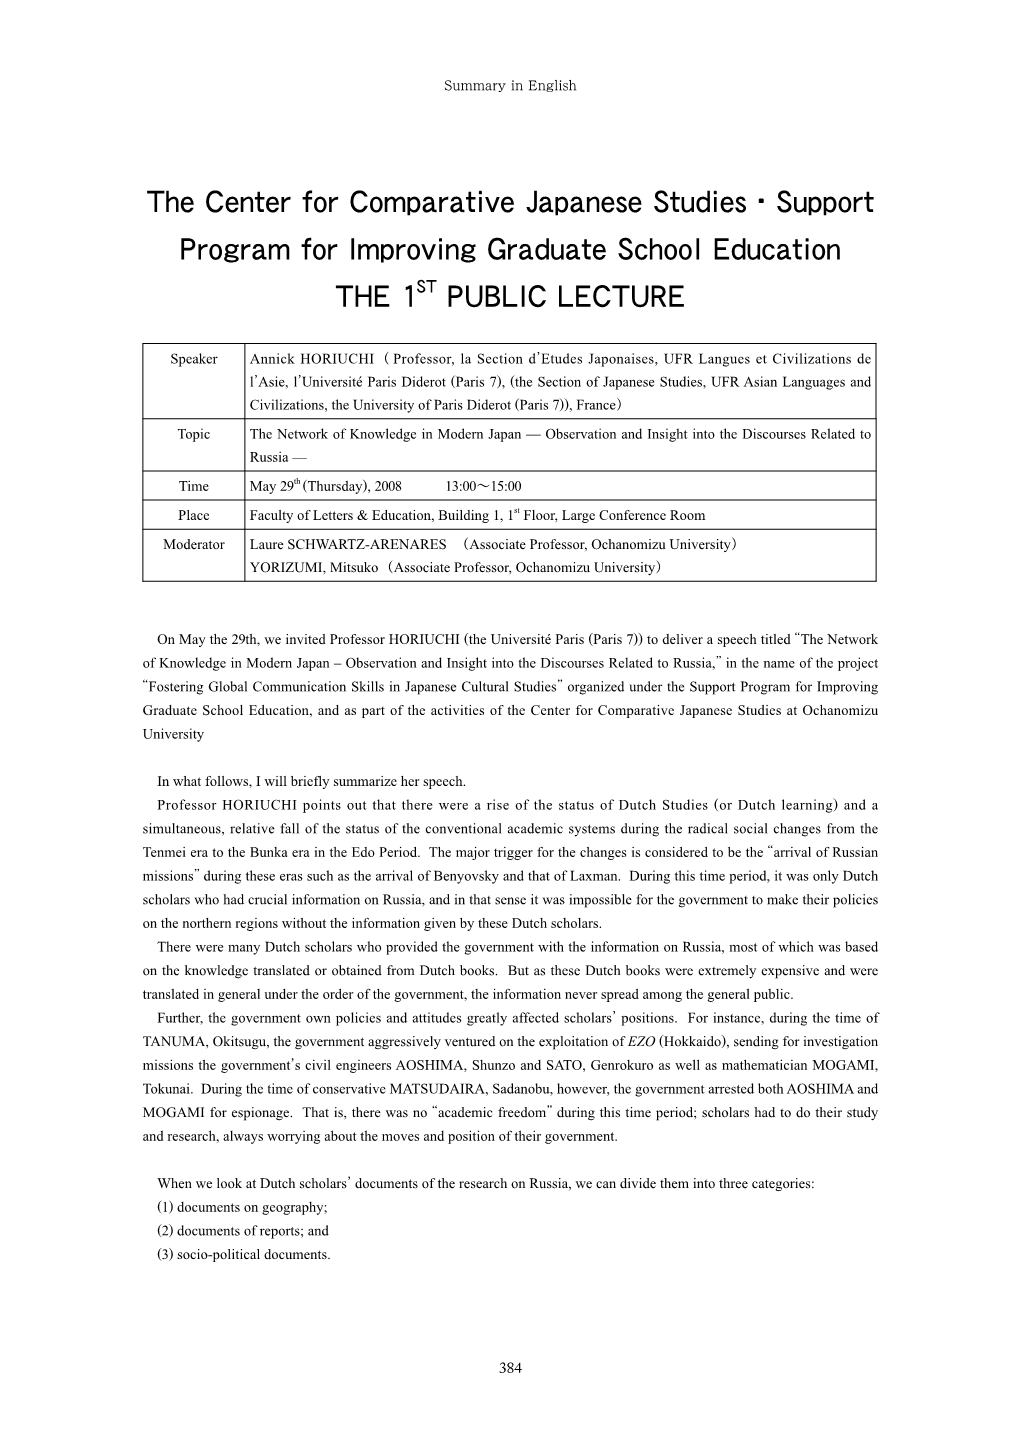 The Center for Comparative Japanese Studies・Support Program for Improving Graduate School Education the 1ST PUBLIC LECTURE